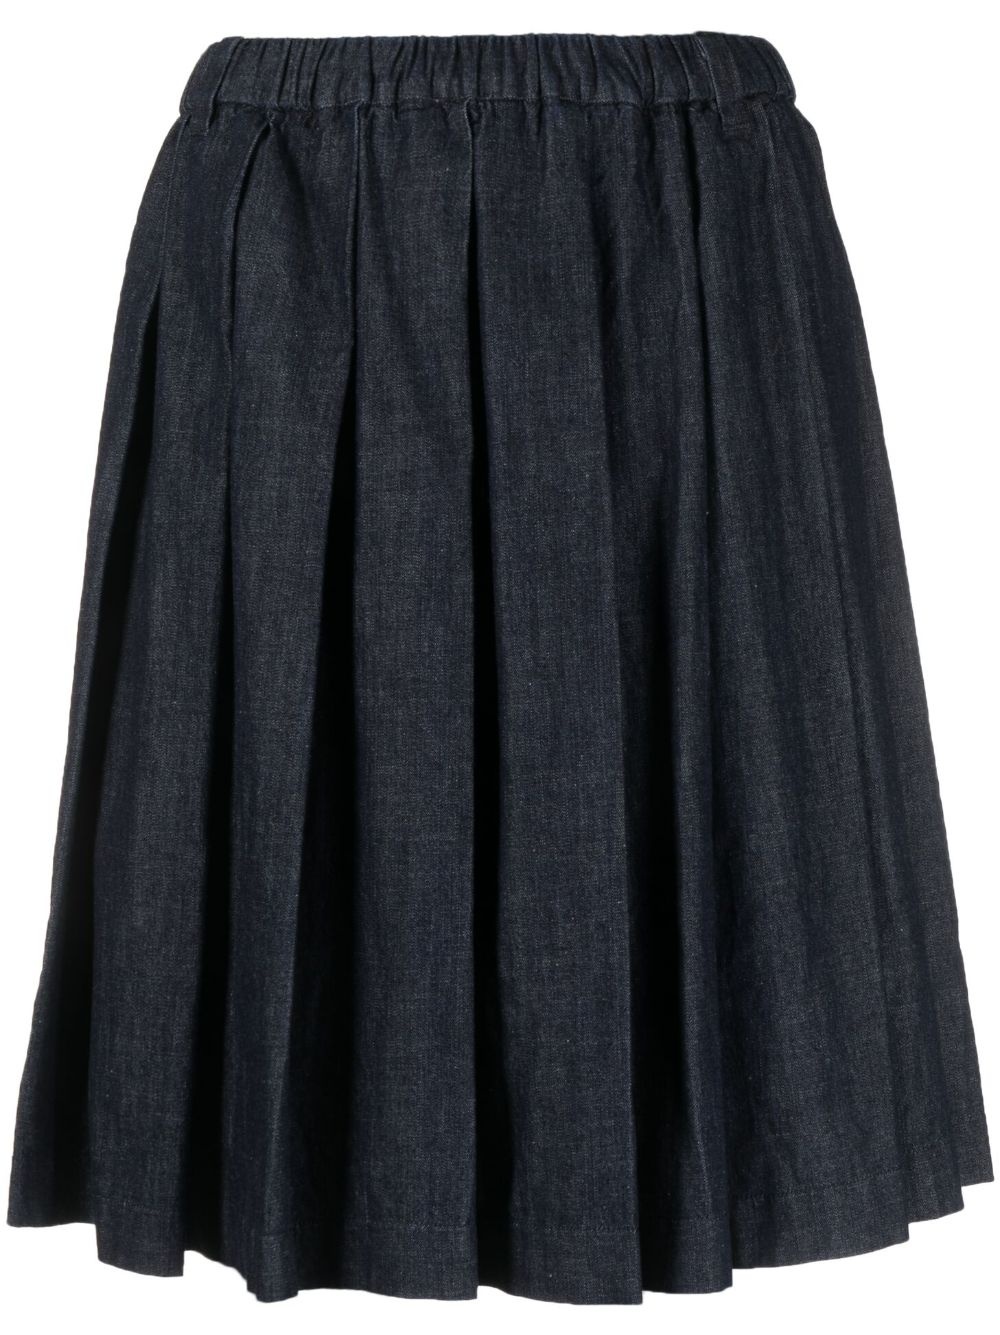 pleated chambray cotton skirt - 1